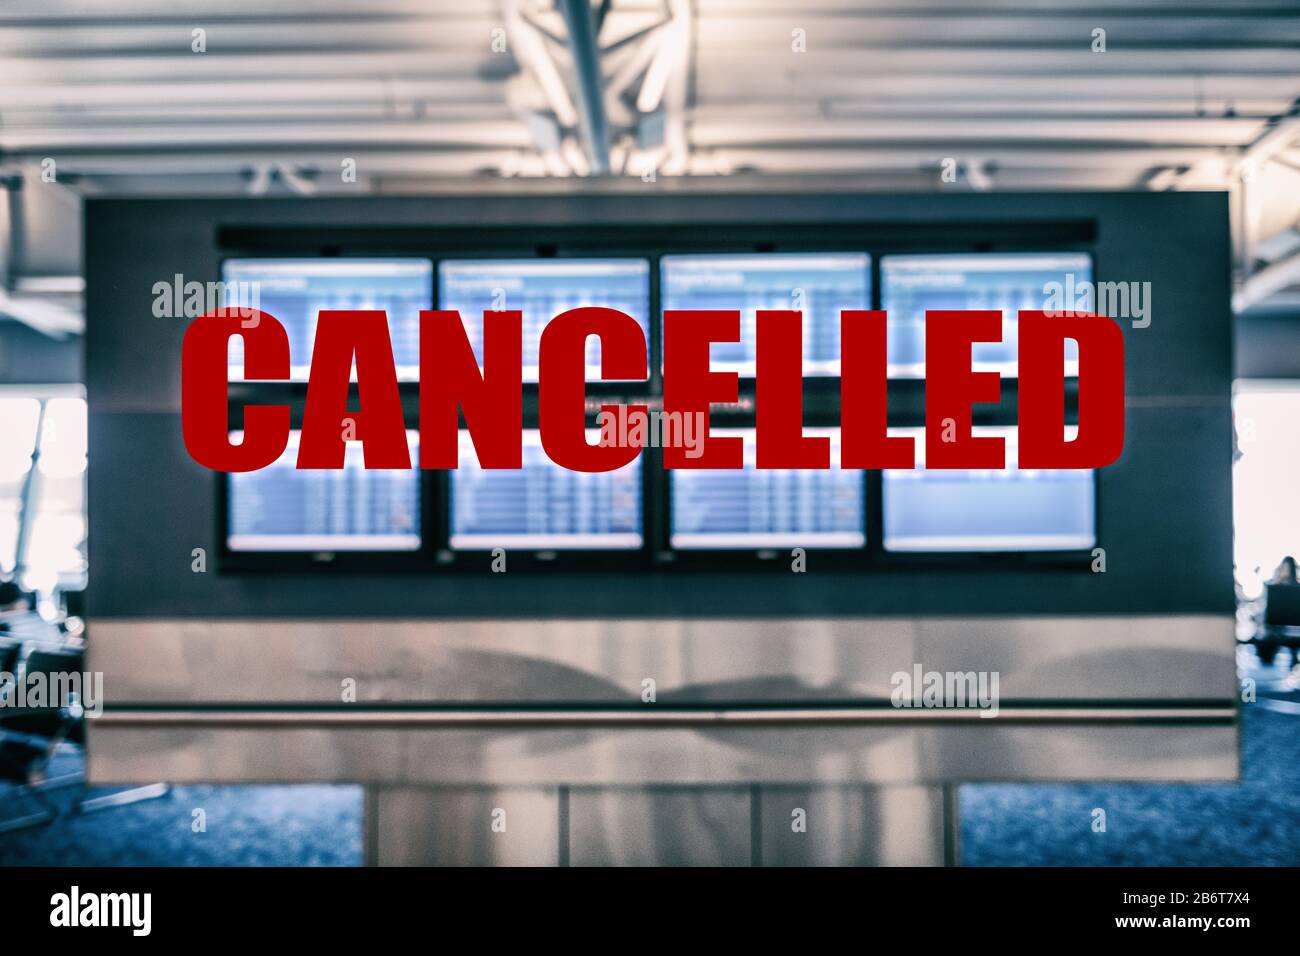 Canceled flights from China in Europe airports. Travel vacations cancelled for fear of spreading coronavirus Airport terminal screens showing departures and arrivals of planes with title in red. Stock Photo